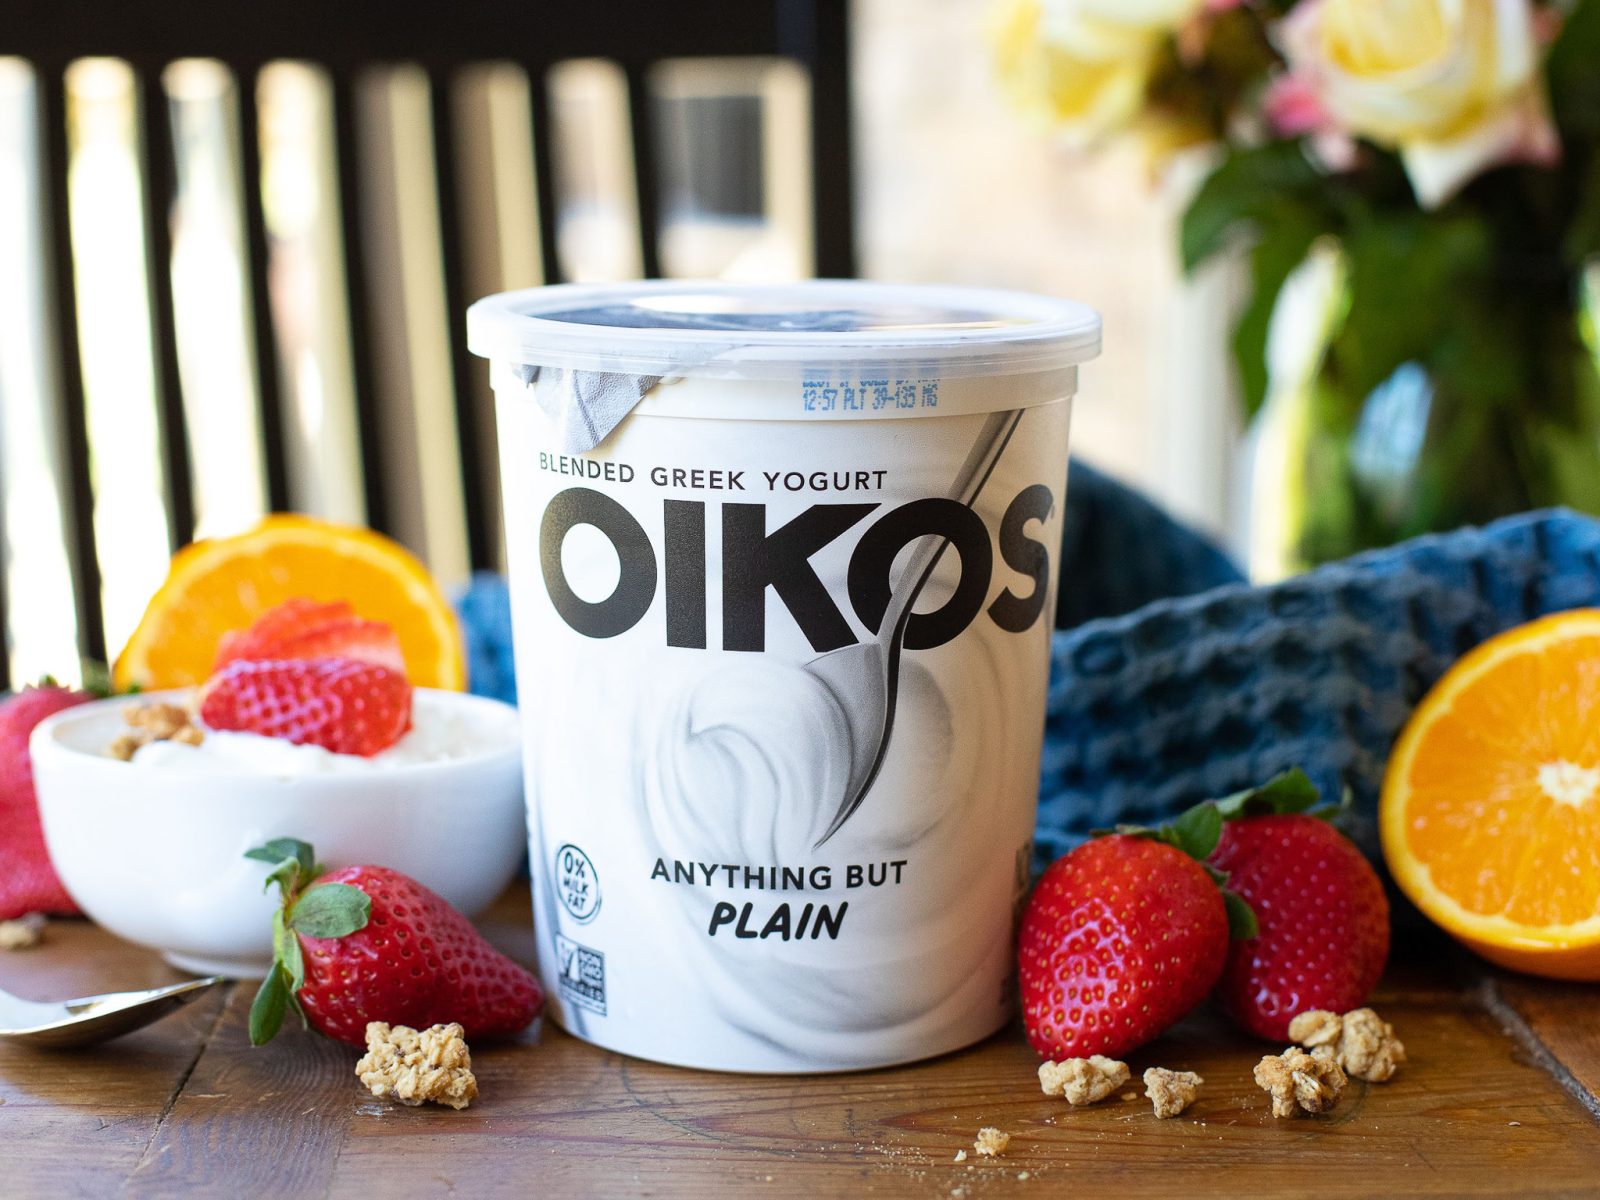 Stock Up On Dannon, Oikos & International Delight And Earn With The Crave & Save Program